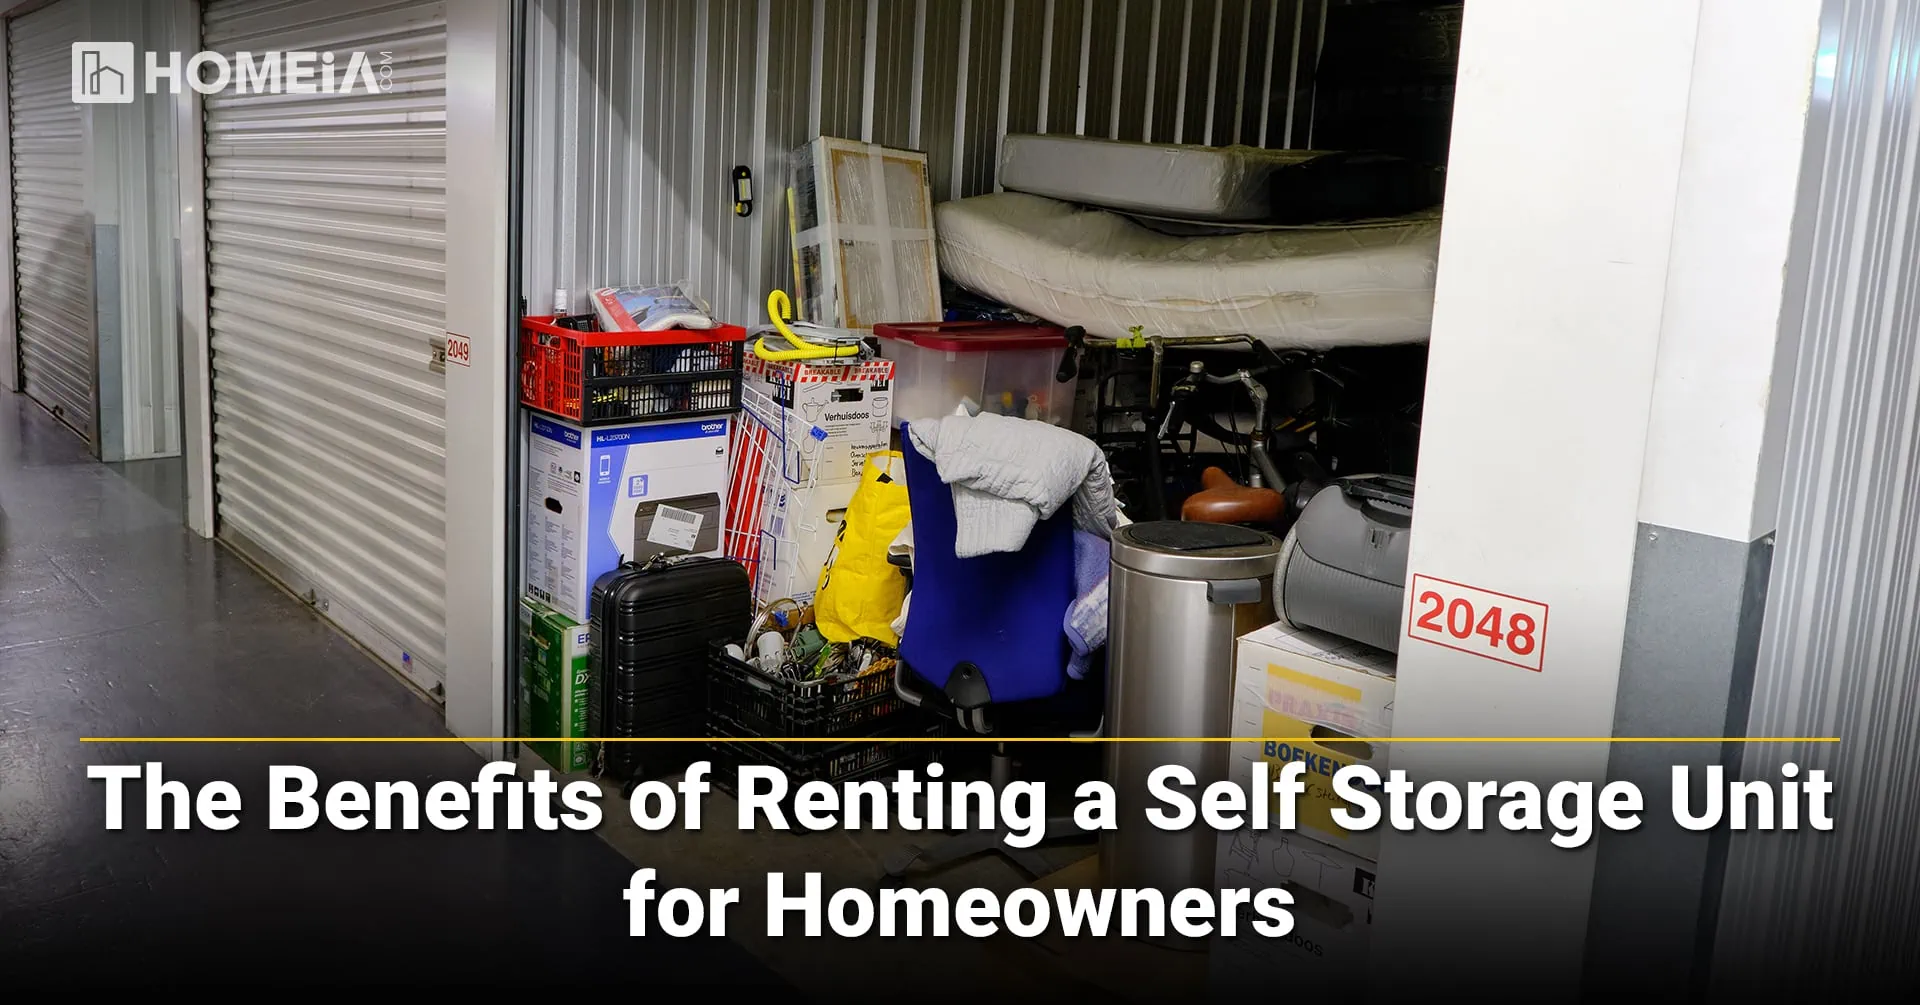 The 7 Benefits of Renting a Self Storage Unit for Homeowners